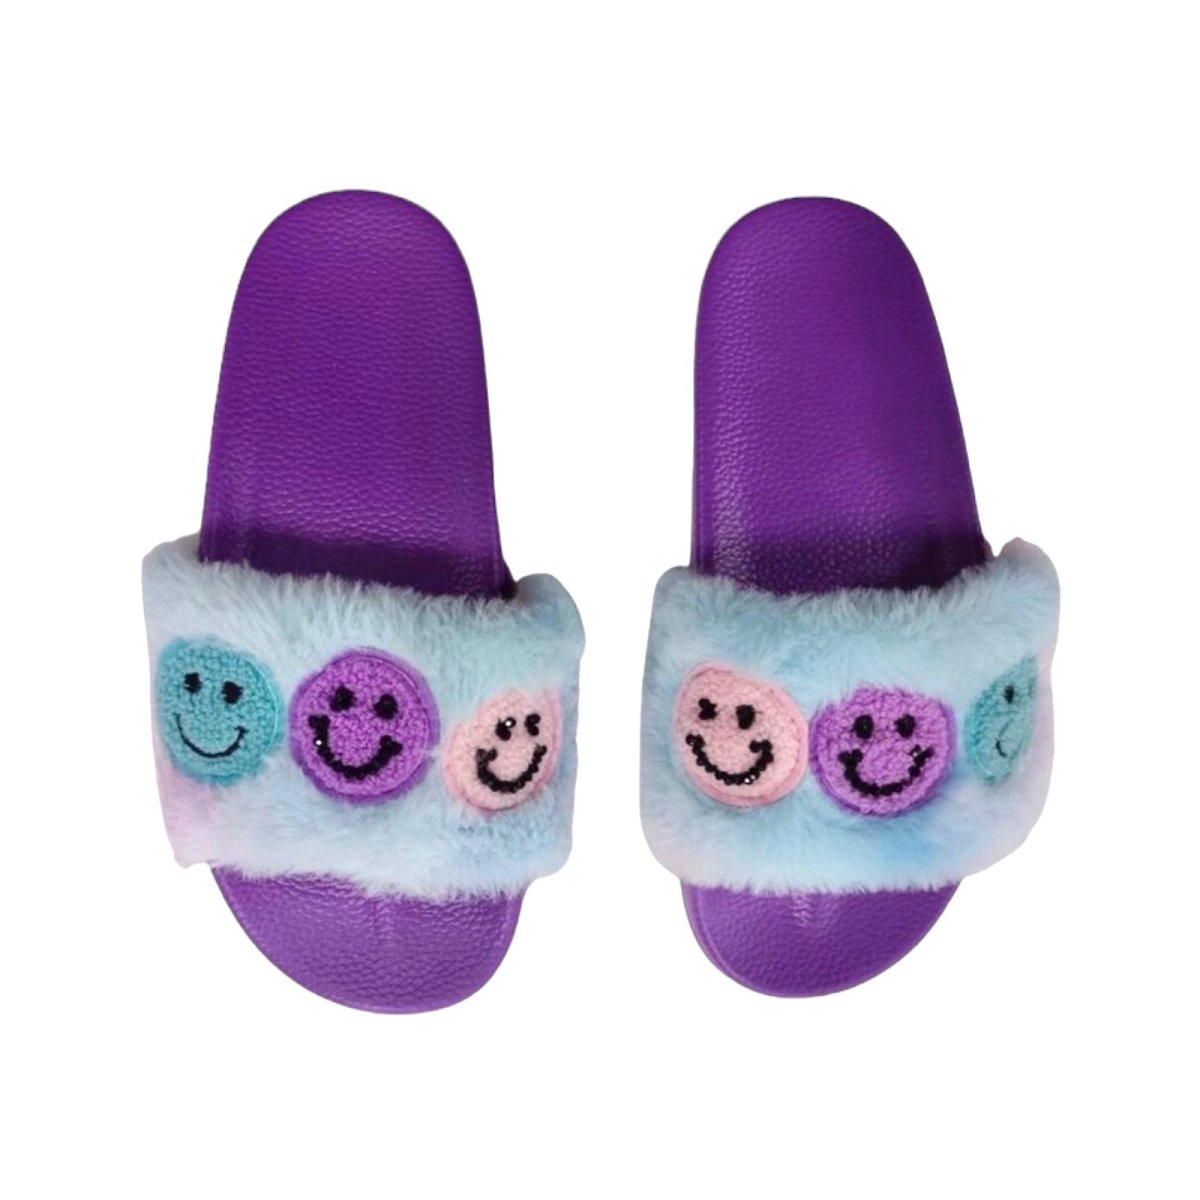 SMILEY FACE FUZZY SLIDES - SANDALS